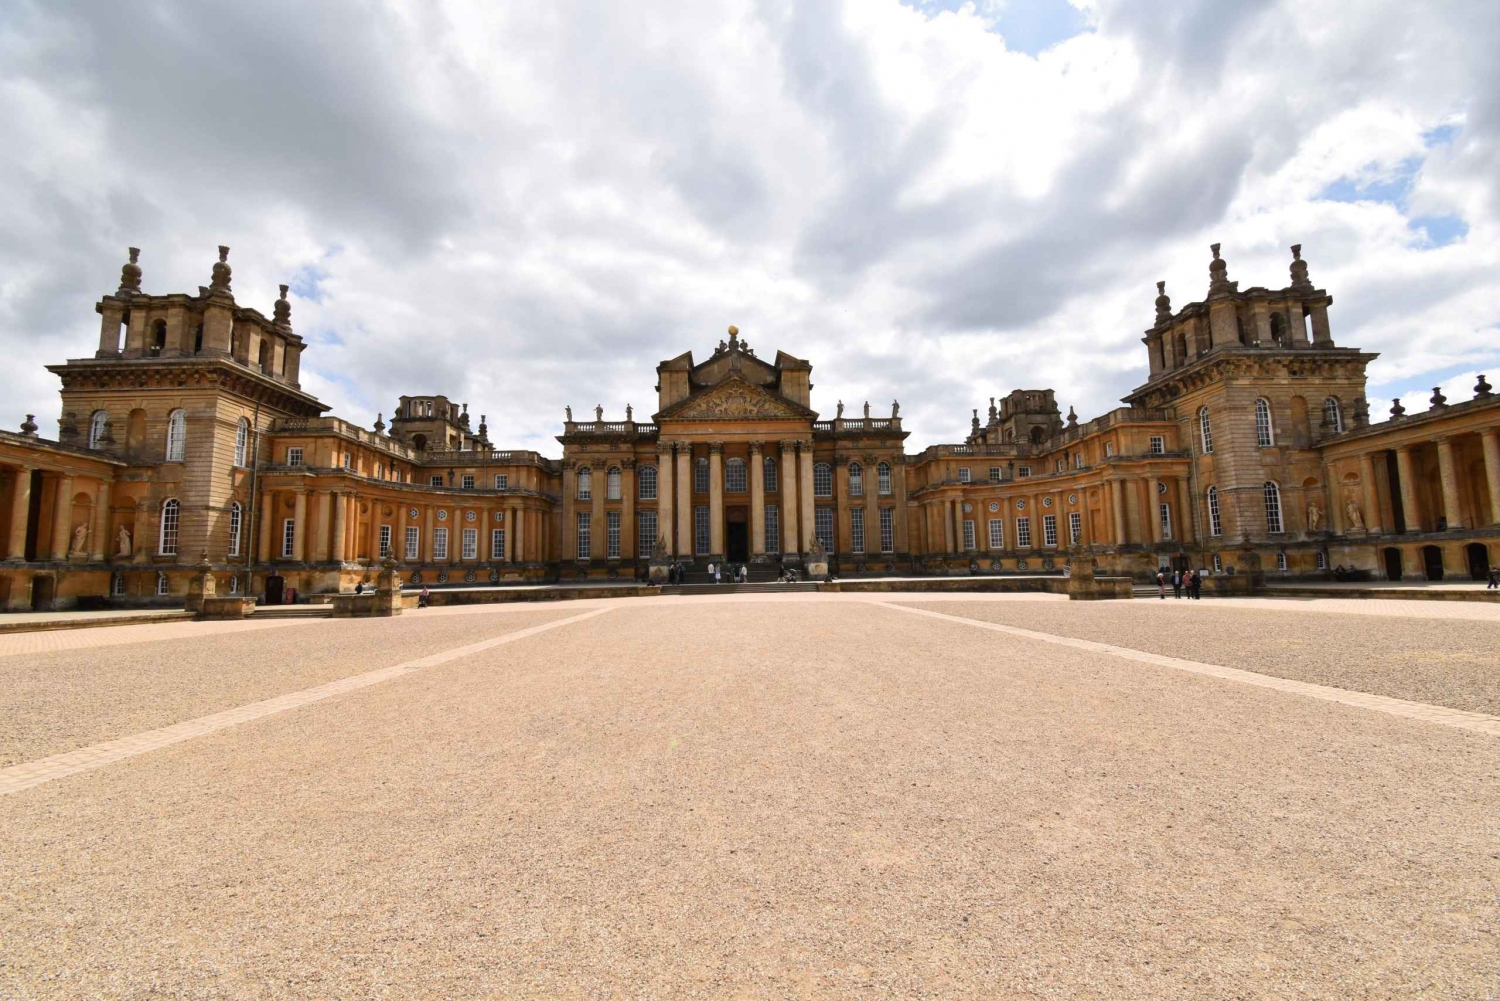 Private Blenheim Palace Day Tour from London